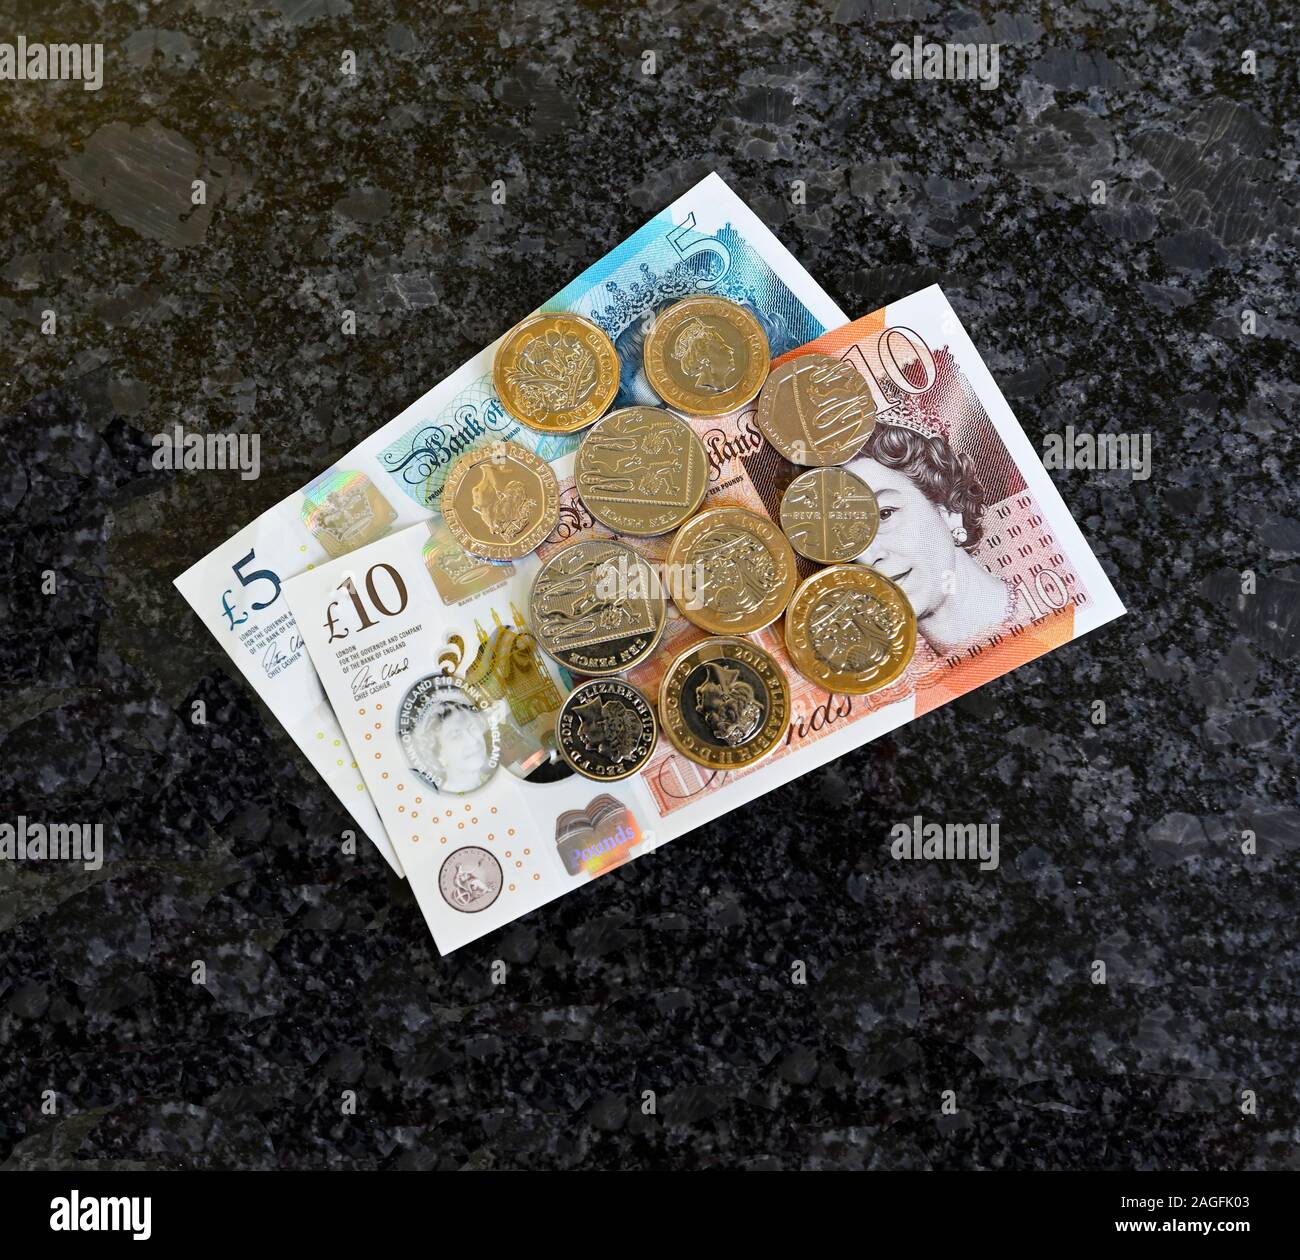 Bank of England £10 and £5 notes and £1, 20p, 10p and 5p coins. Stock Photo